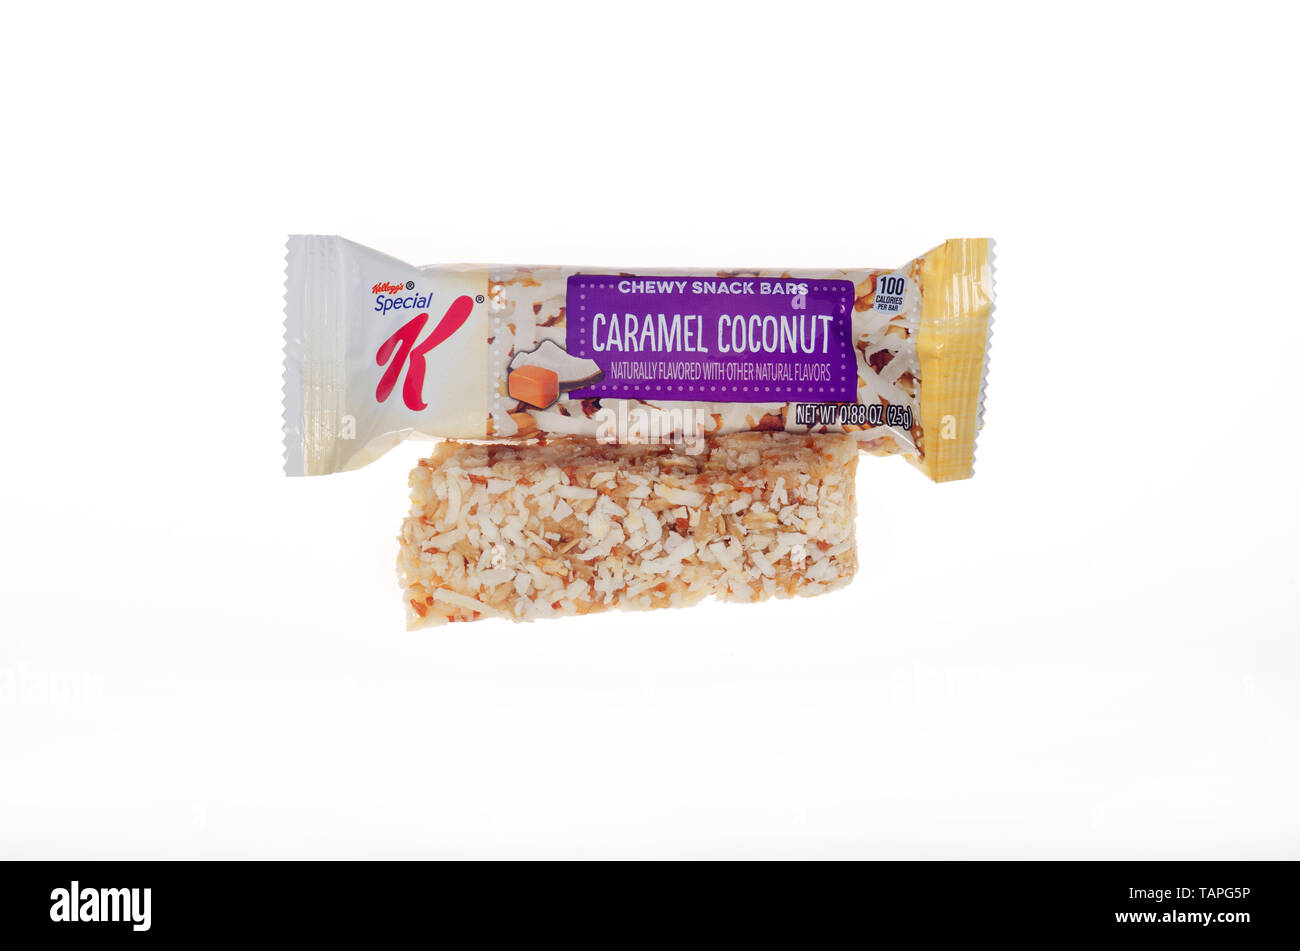 Kellogg’s Special K Chewy Caramel Coconut Snack Bars Stock Photo